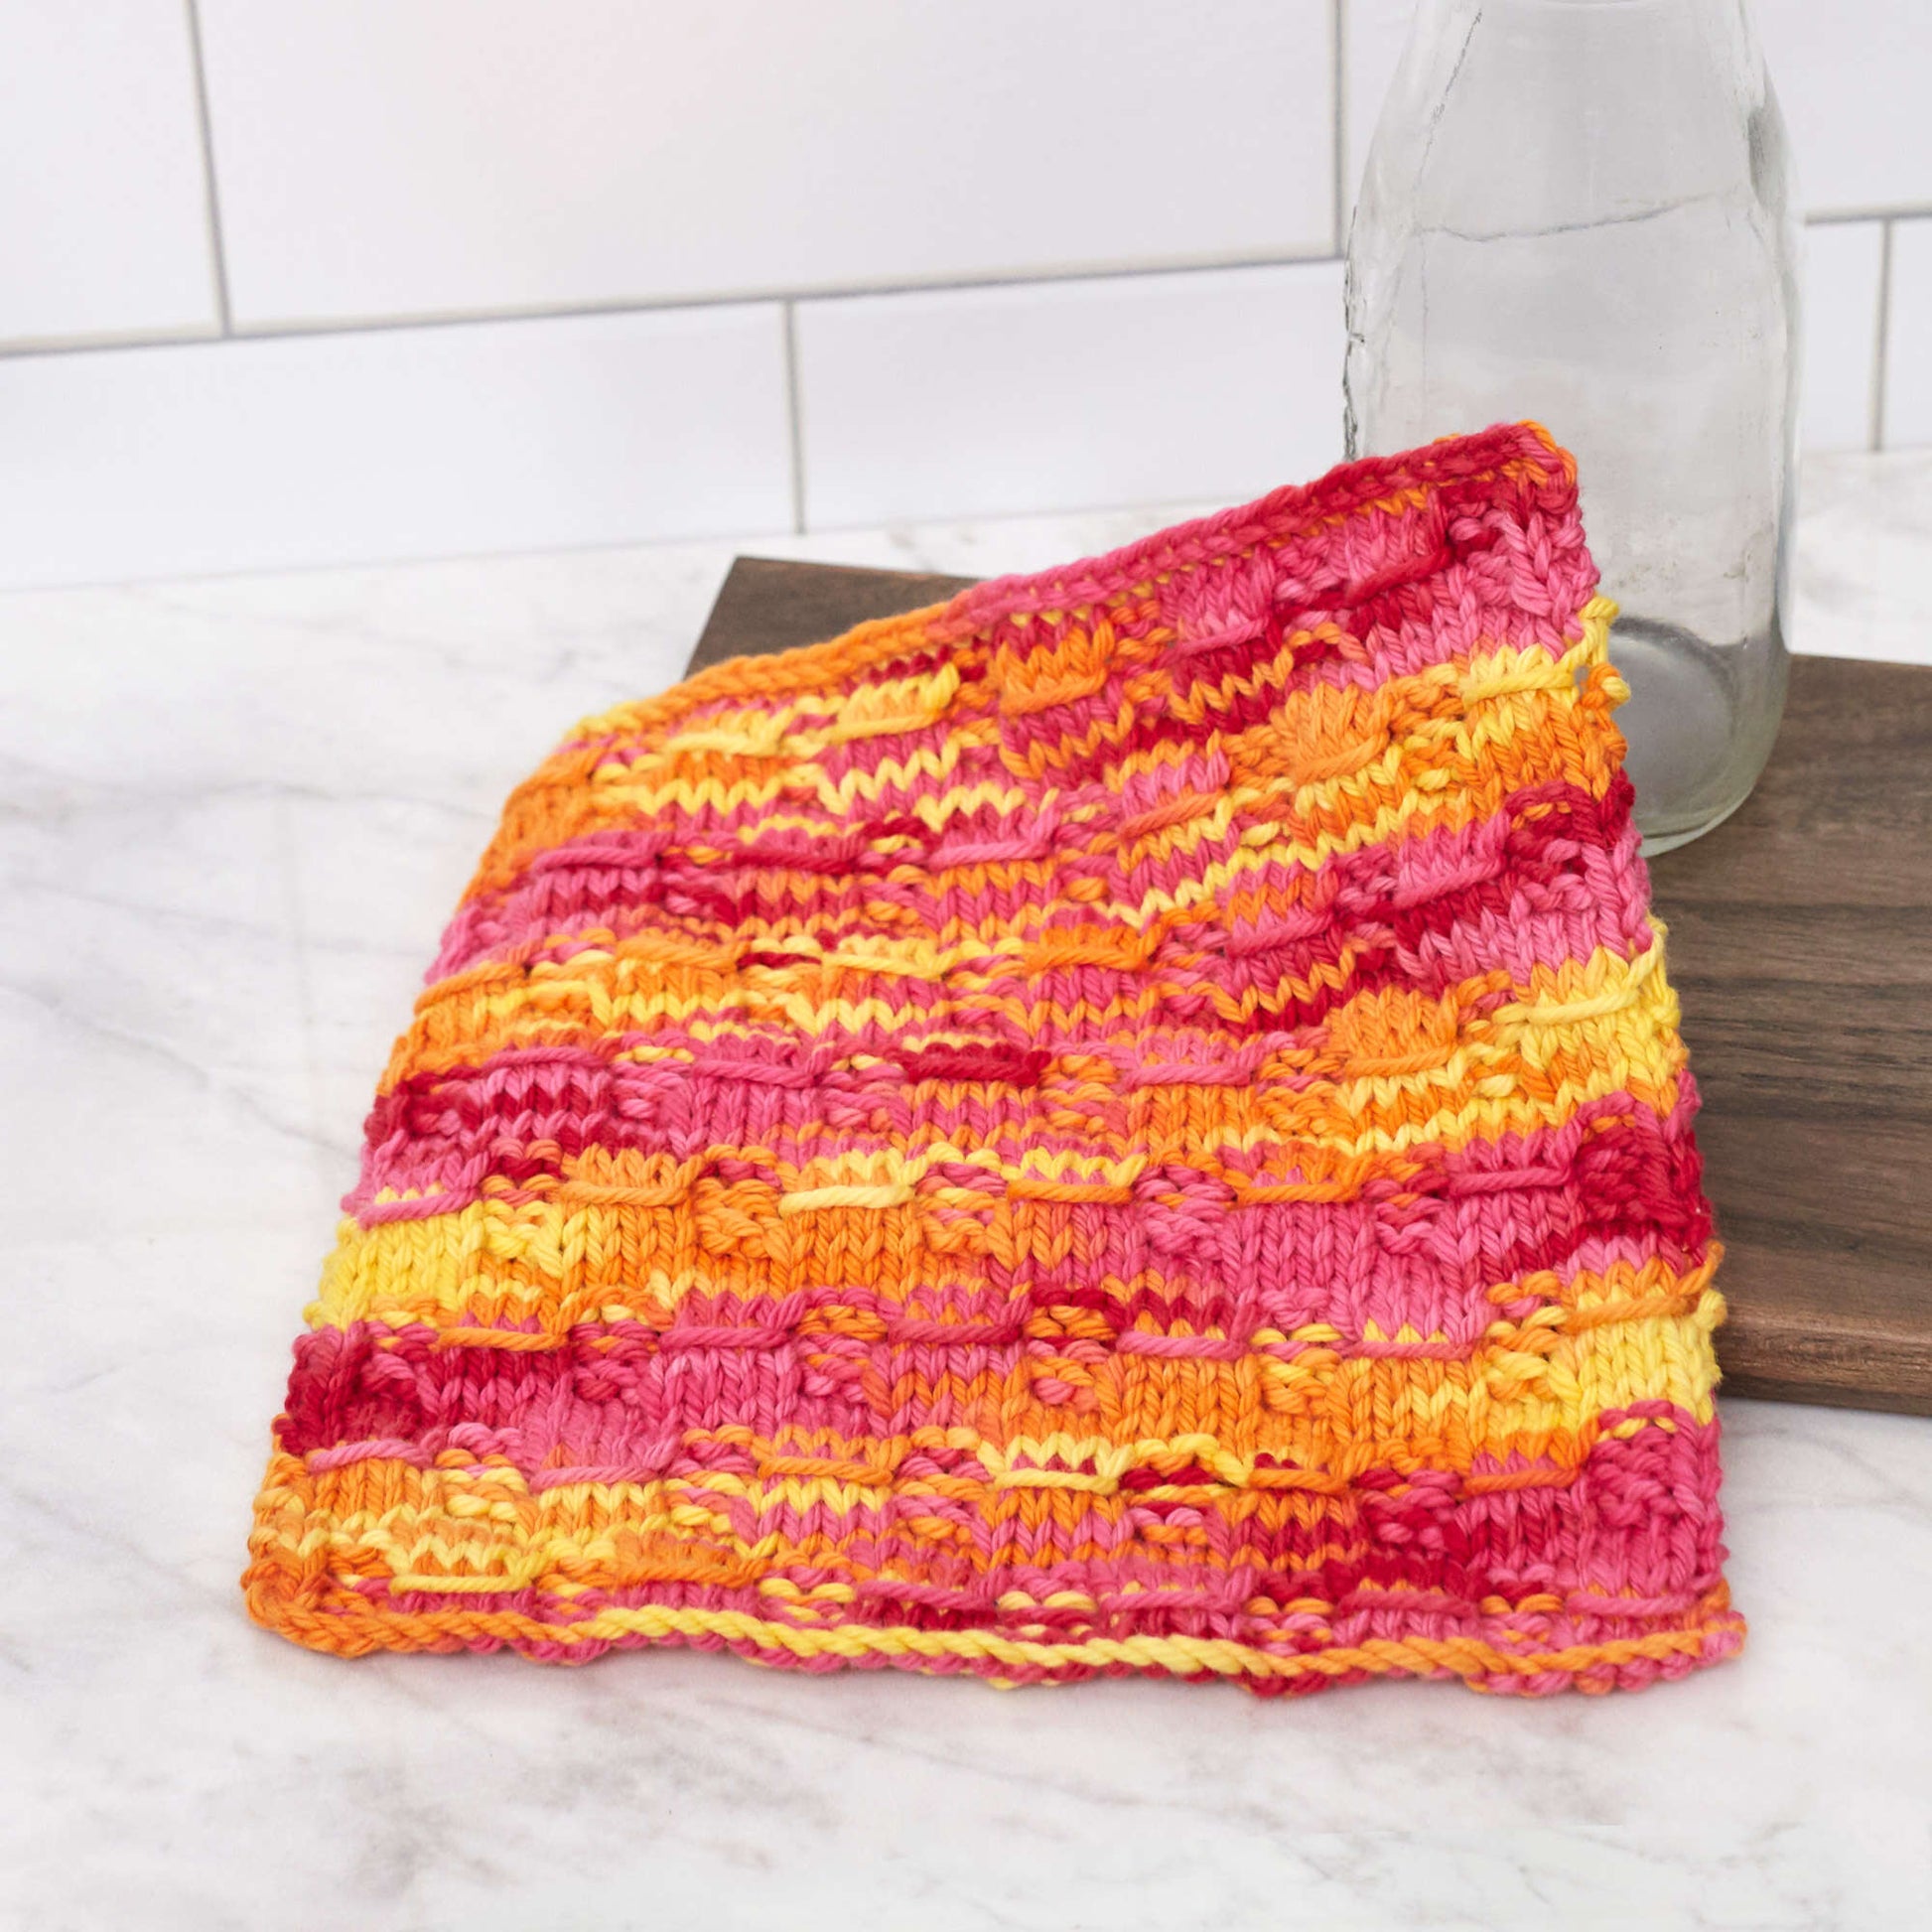 Free Red Heart Knit Wrapped Stitches Washcloth Pattern